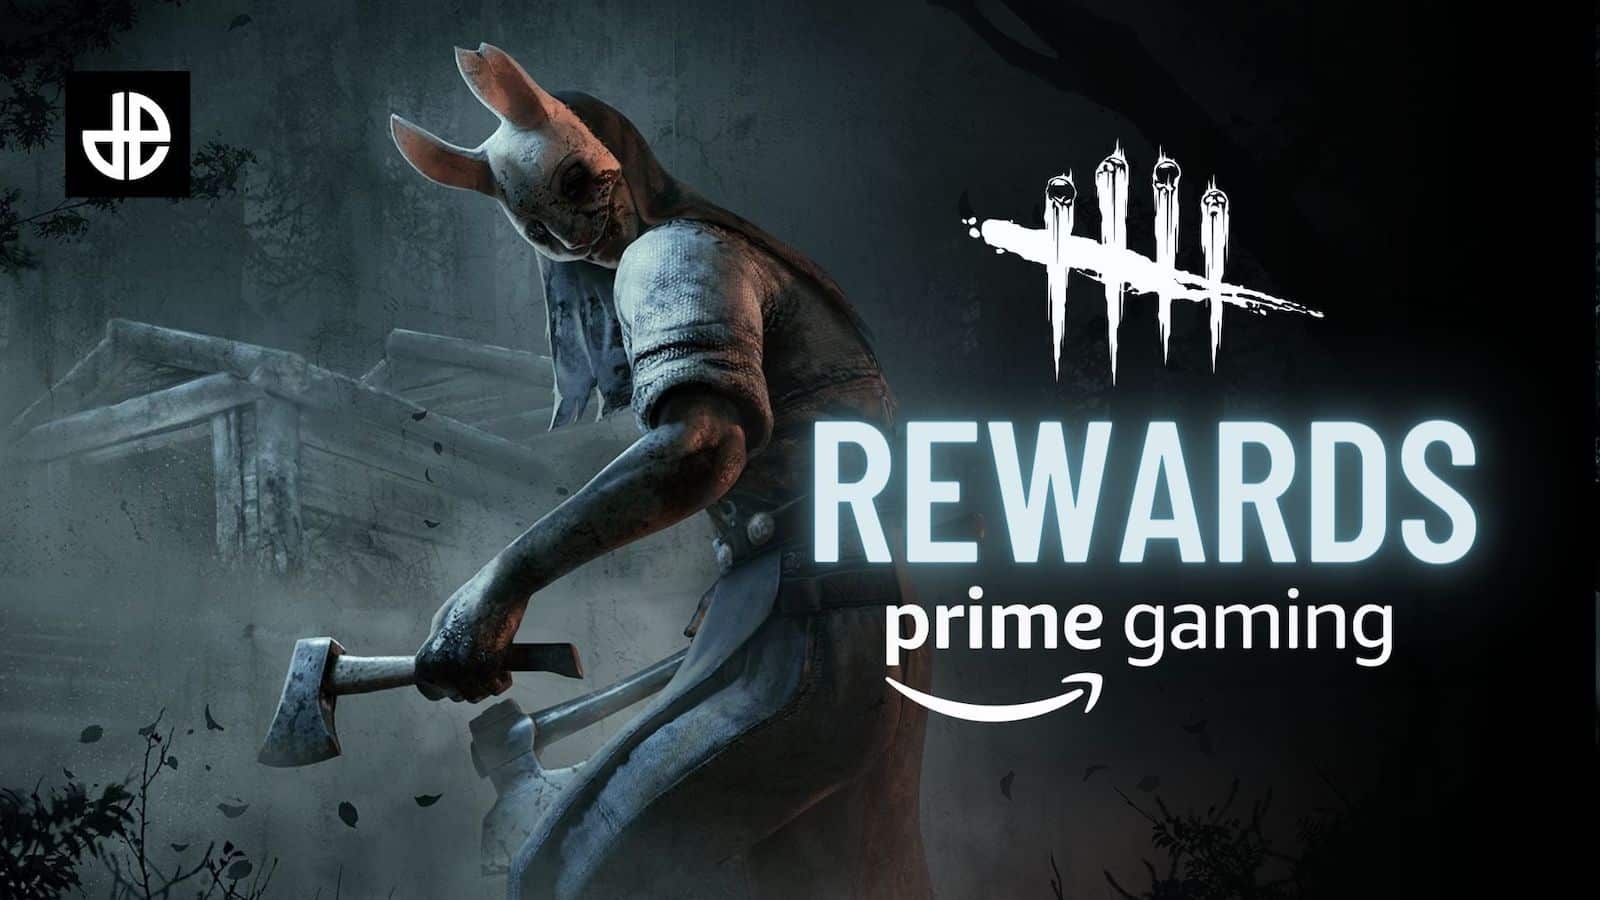 Dead by Daylight Prime Gaming récompense la chasseresse